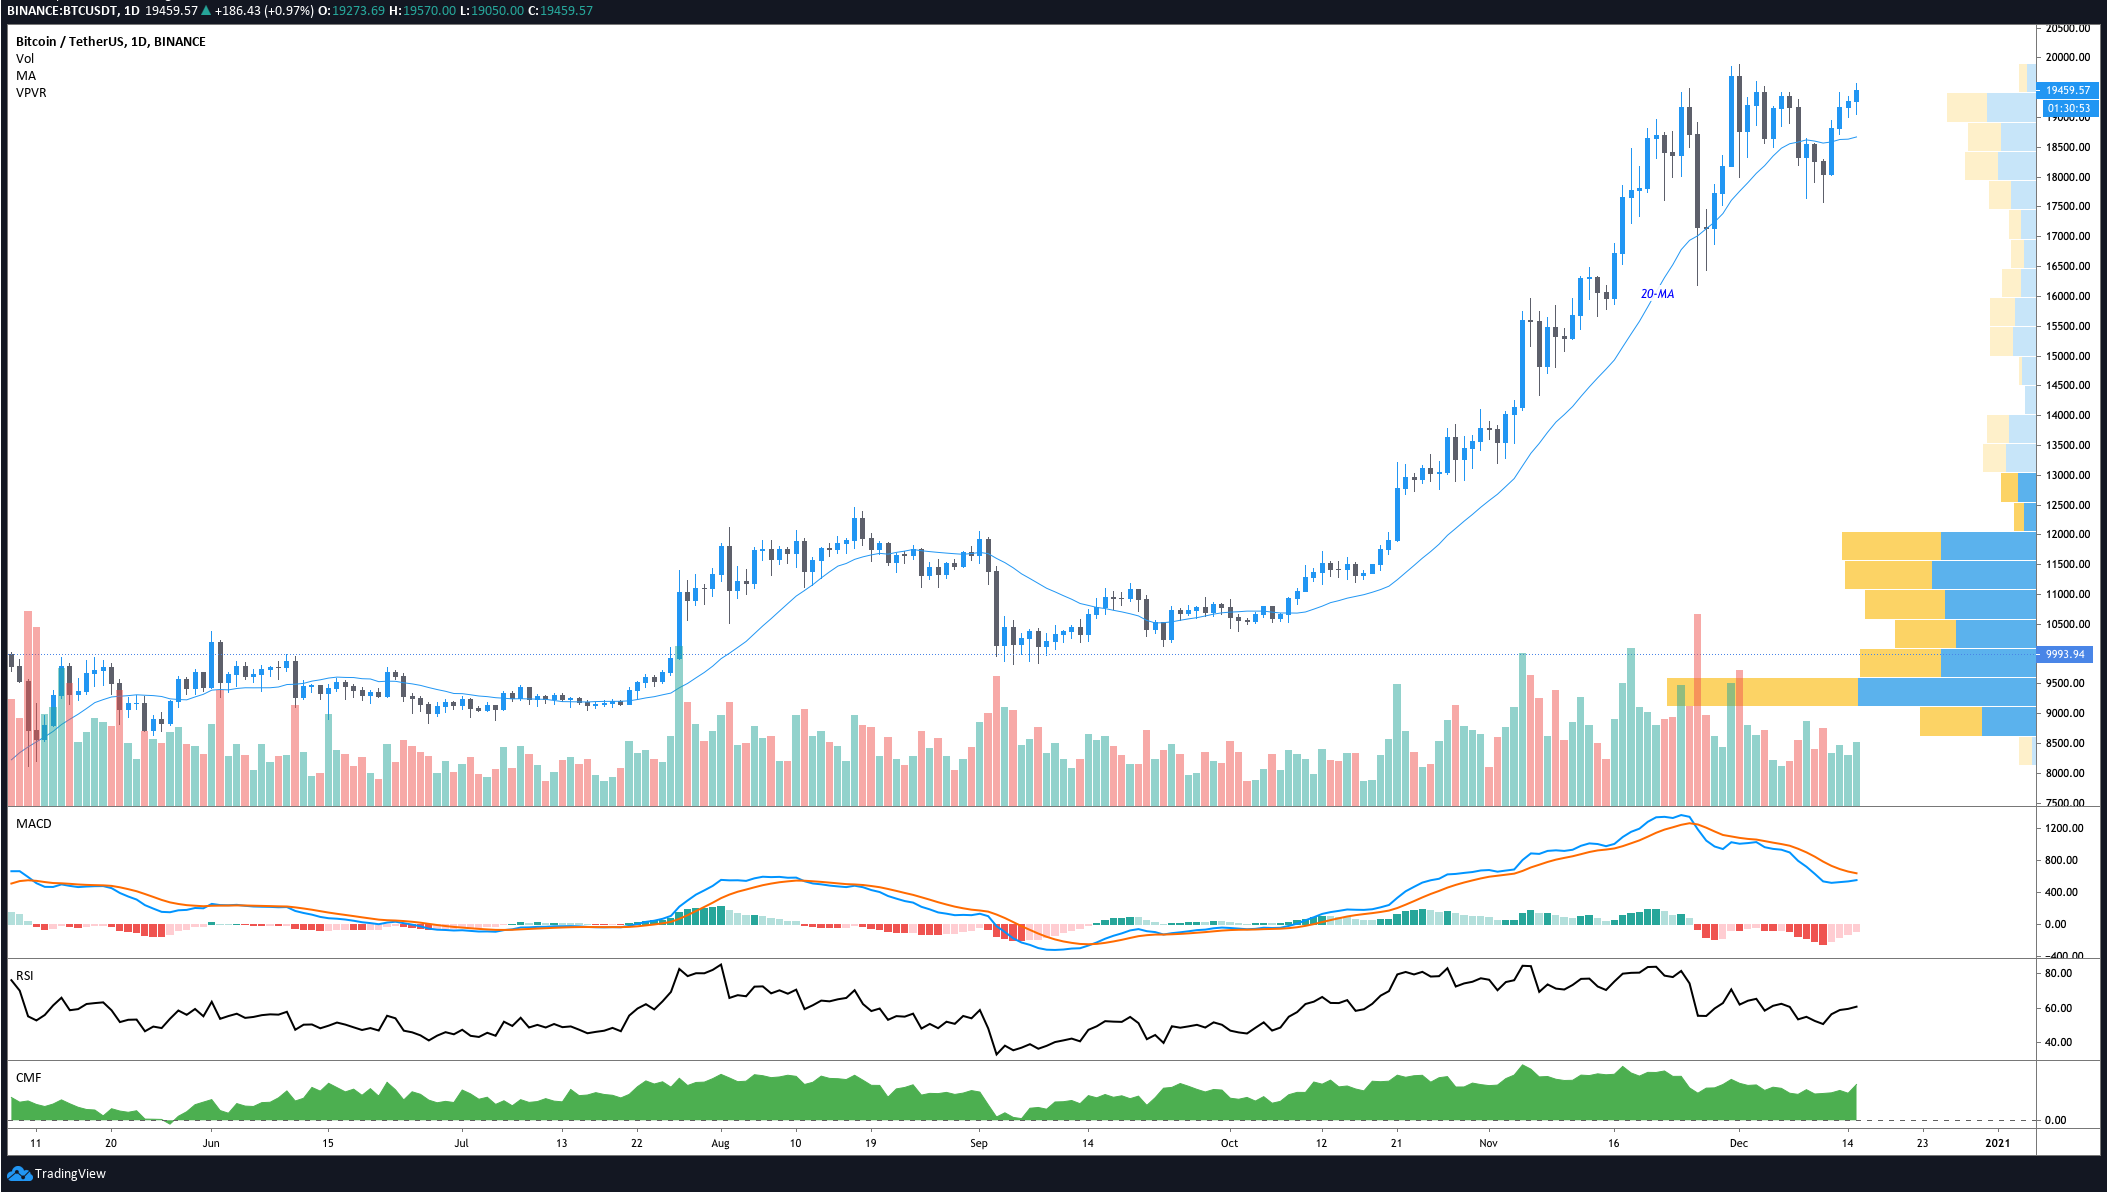 Weekly Notion: Bulls Buy the Dip Again After Bitcoin Price Rejects at a Key Resistance Level